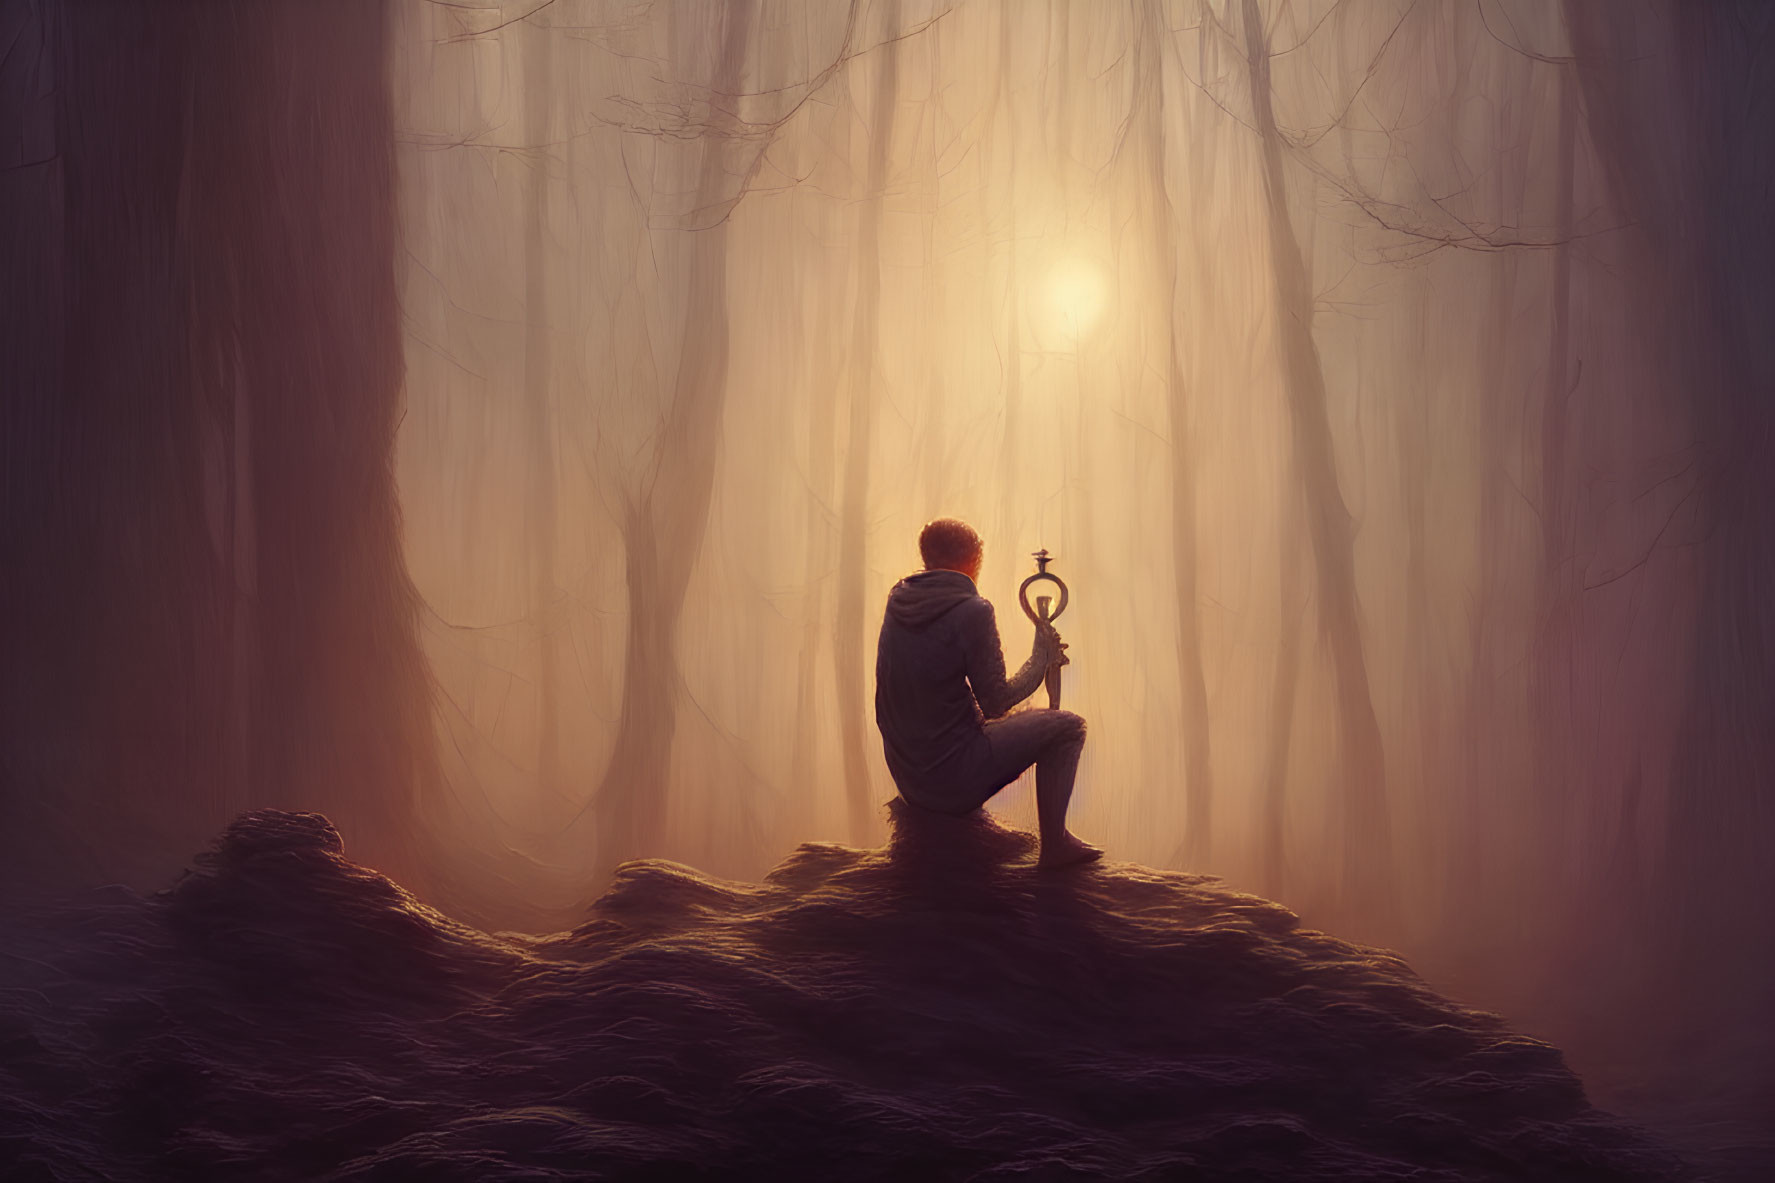 Person sitting on rocky outcrop in misty forest with glowing lantern